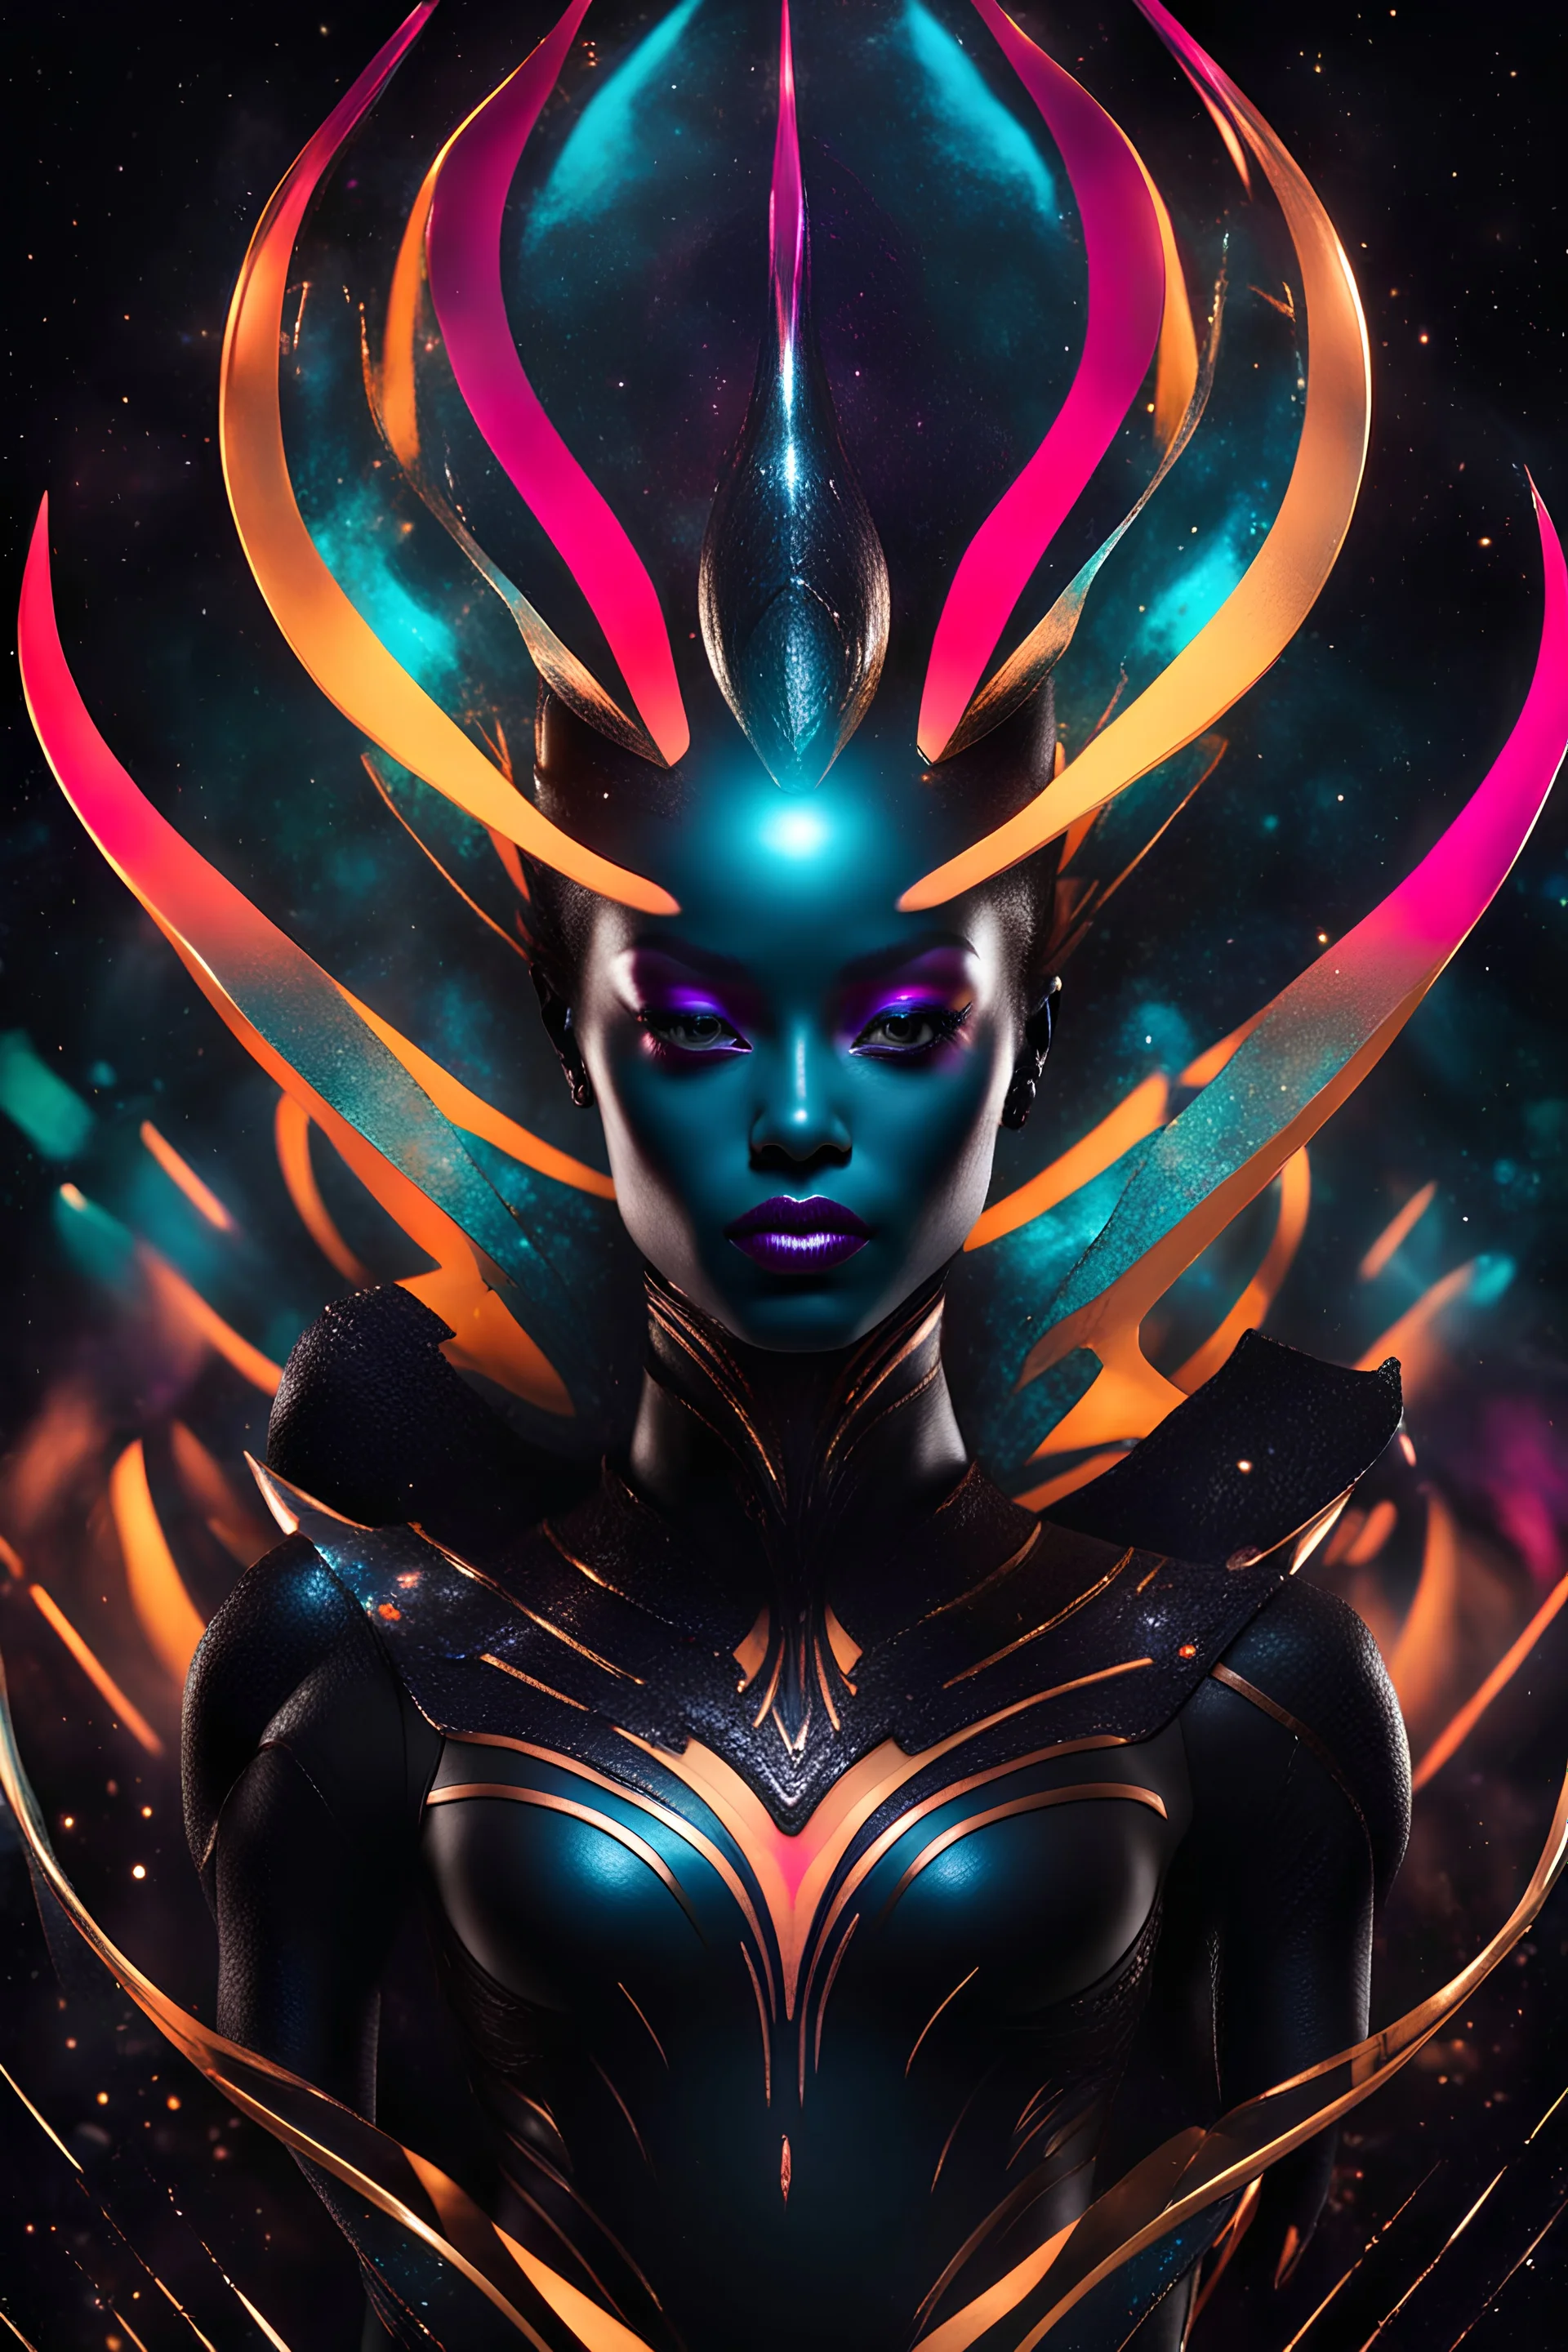 beautiful woman model with make up Cosmic Extraterrestrial, Futuristic alien face with metallic accents and otherworldly colors.., tema halloween, background black